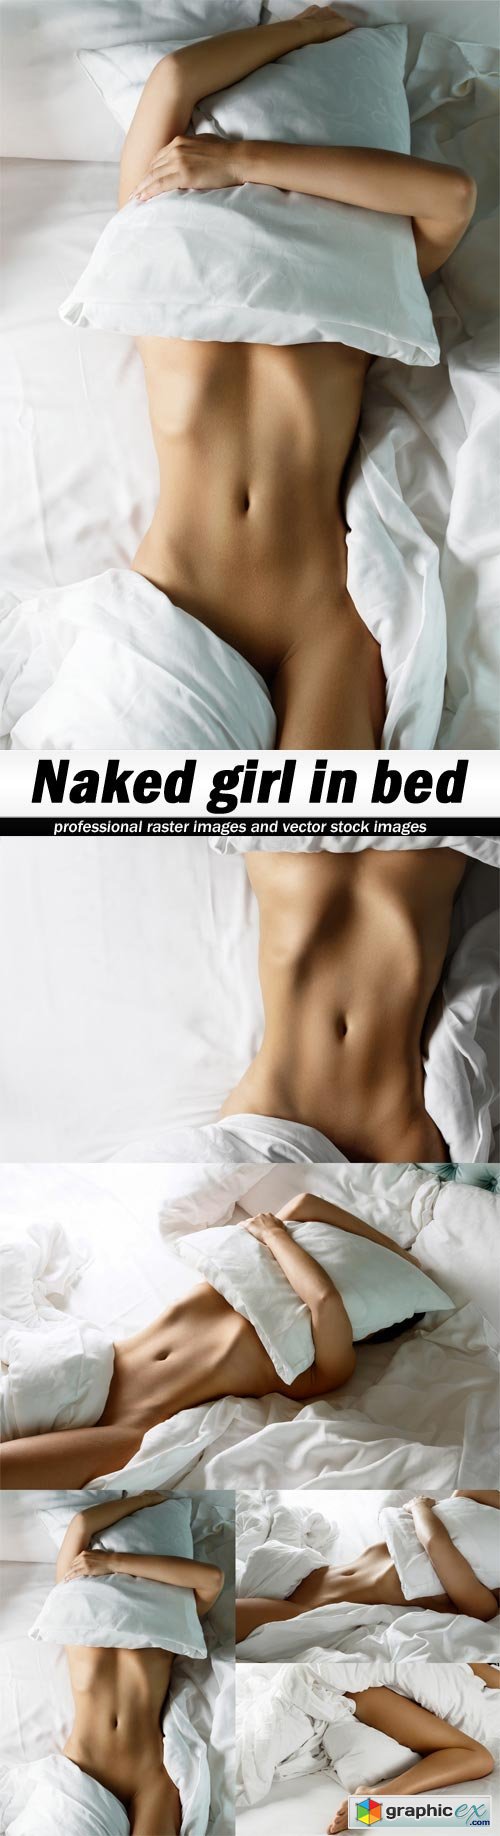 Naked girl in bed-5 UHQ JPEG